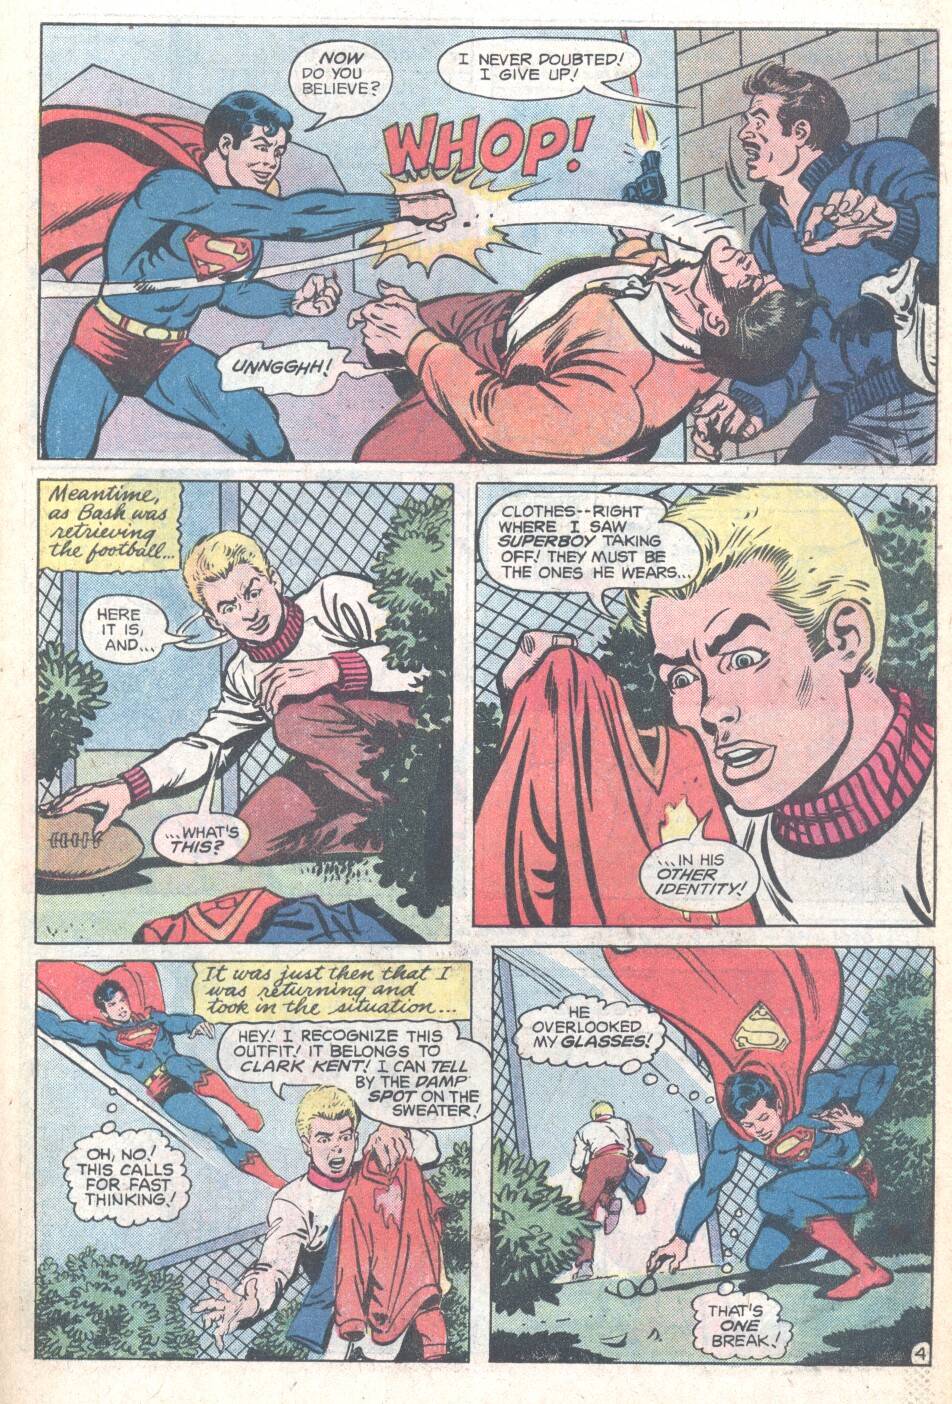 The New Adventures of Superboy 9 Page 23